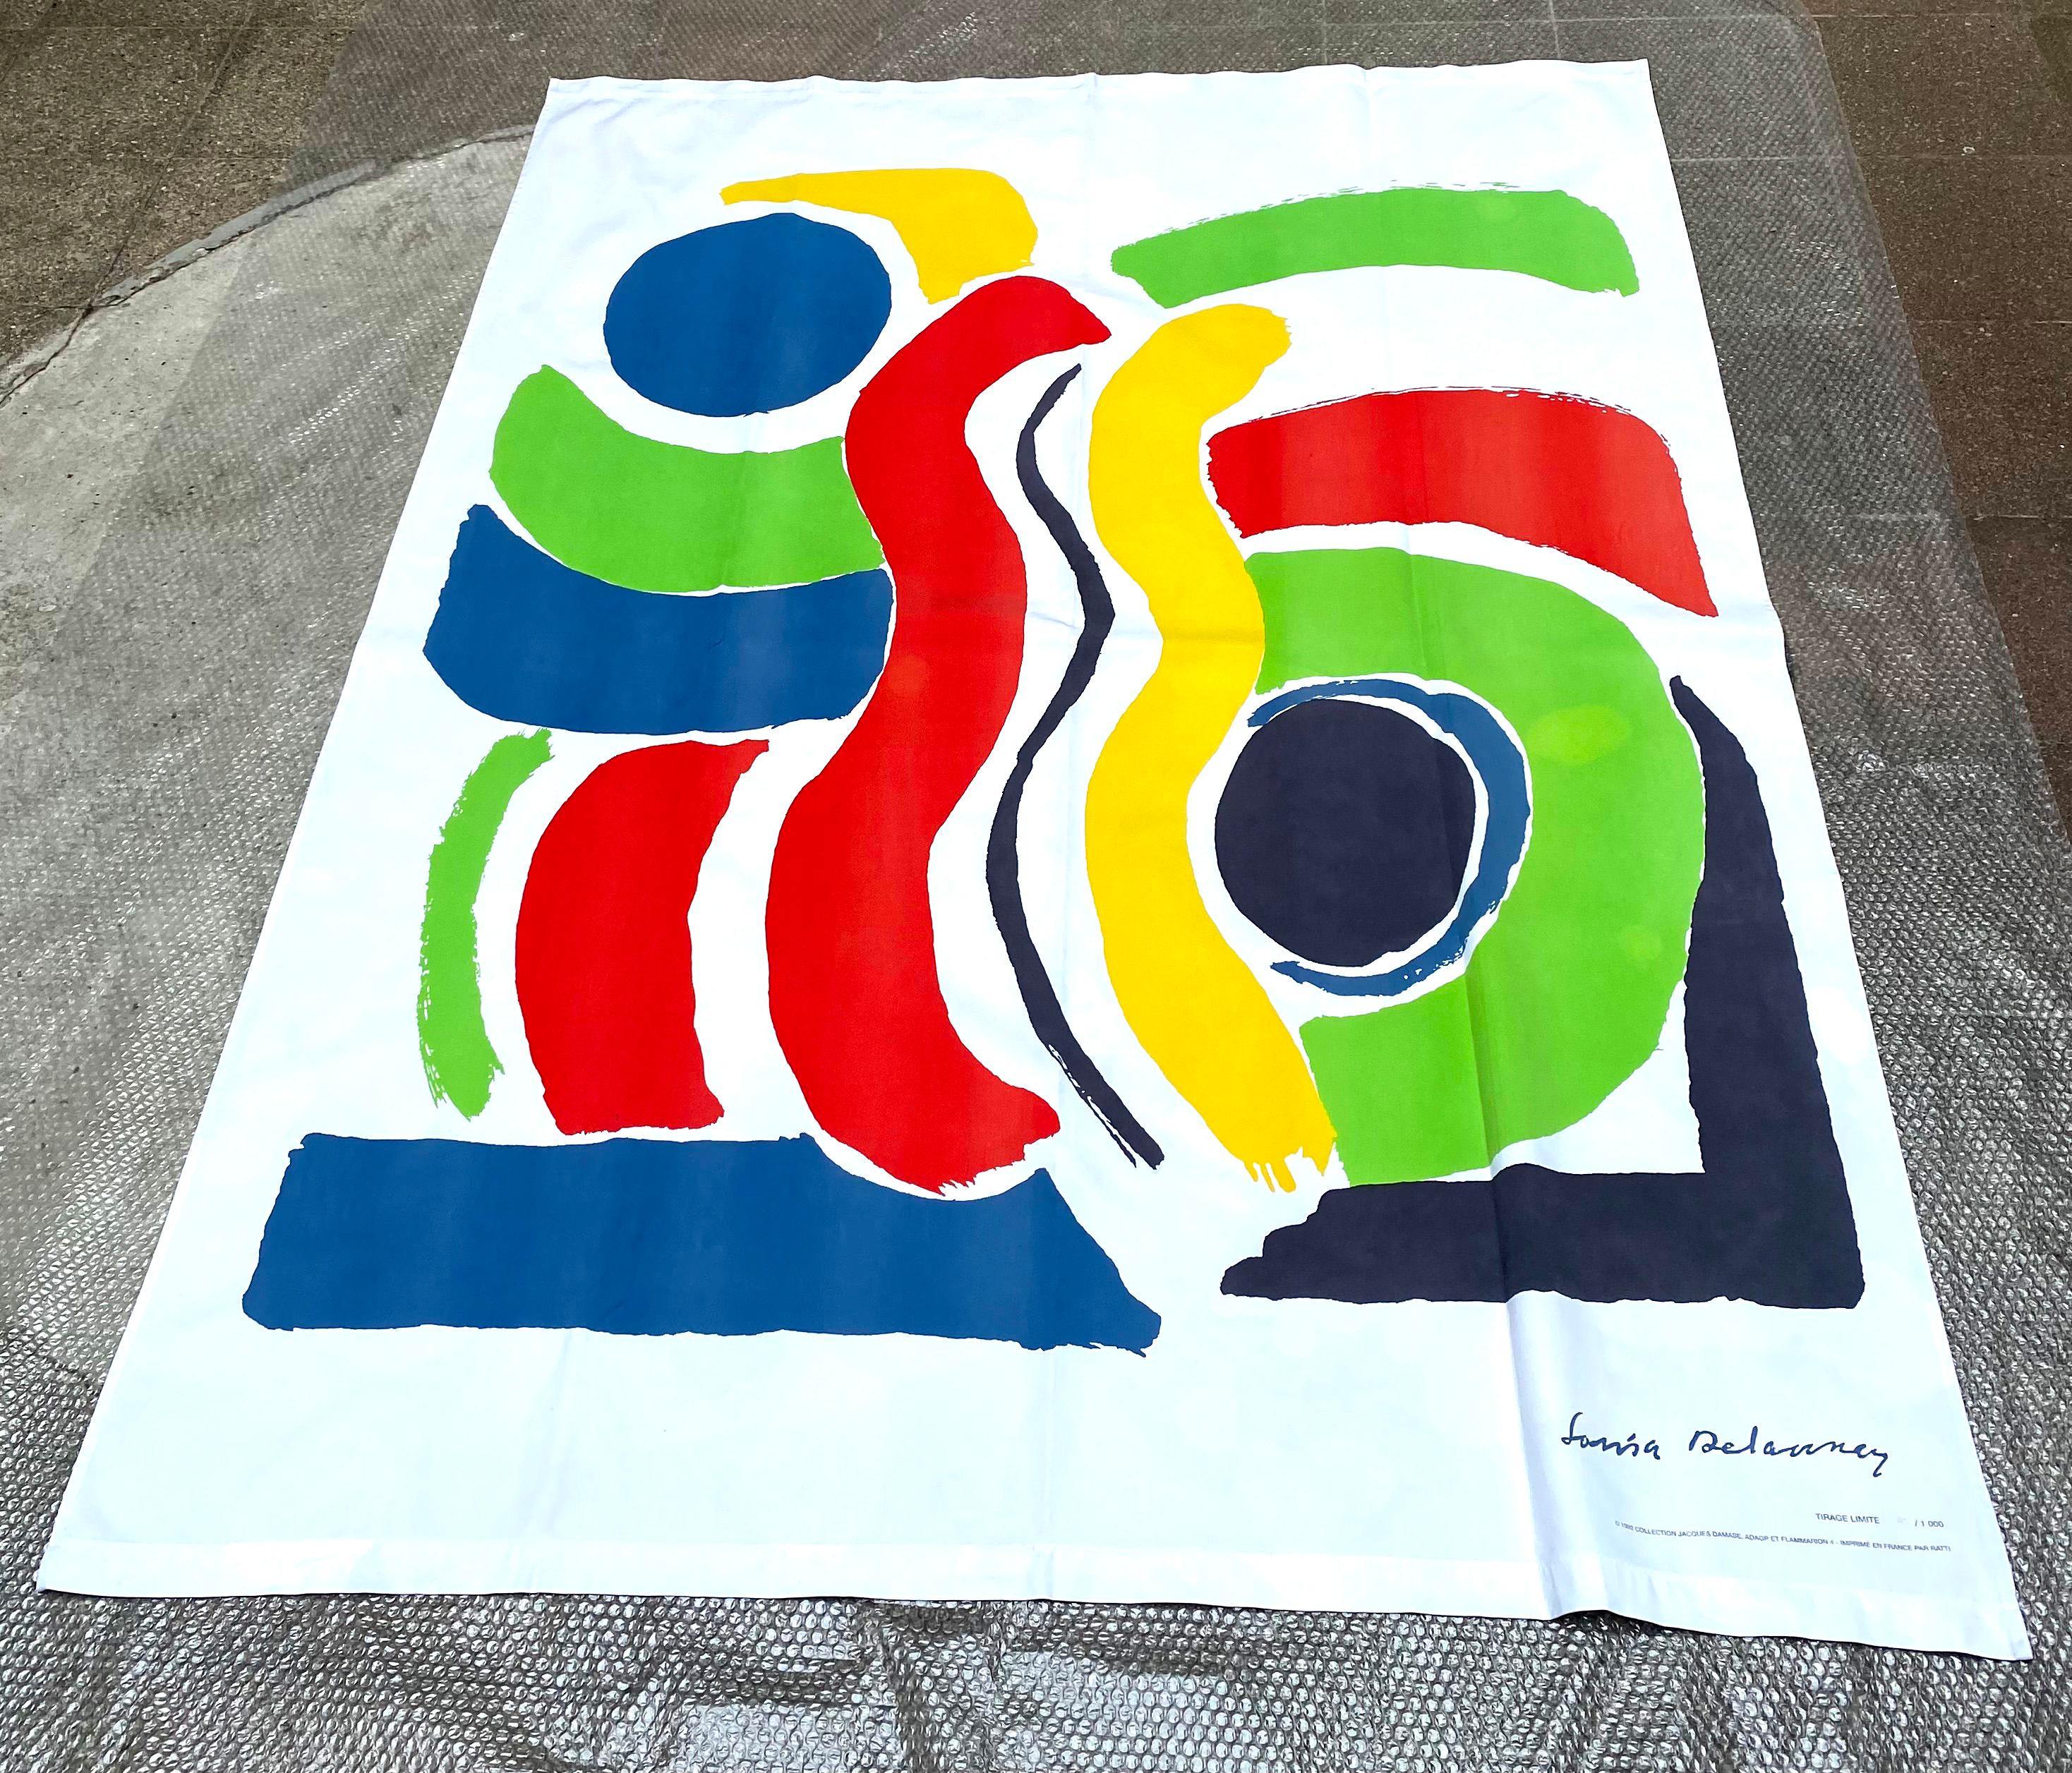 Sonia Delaunay, After 